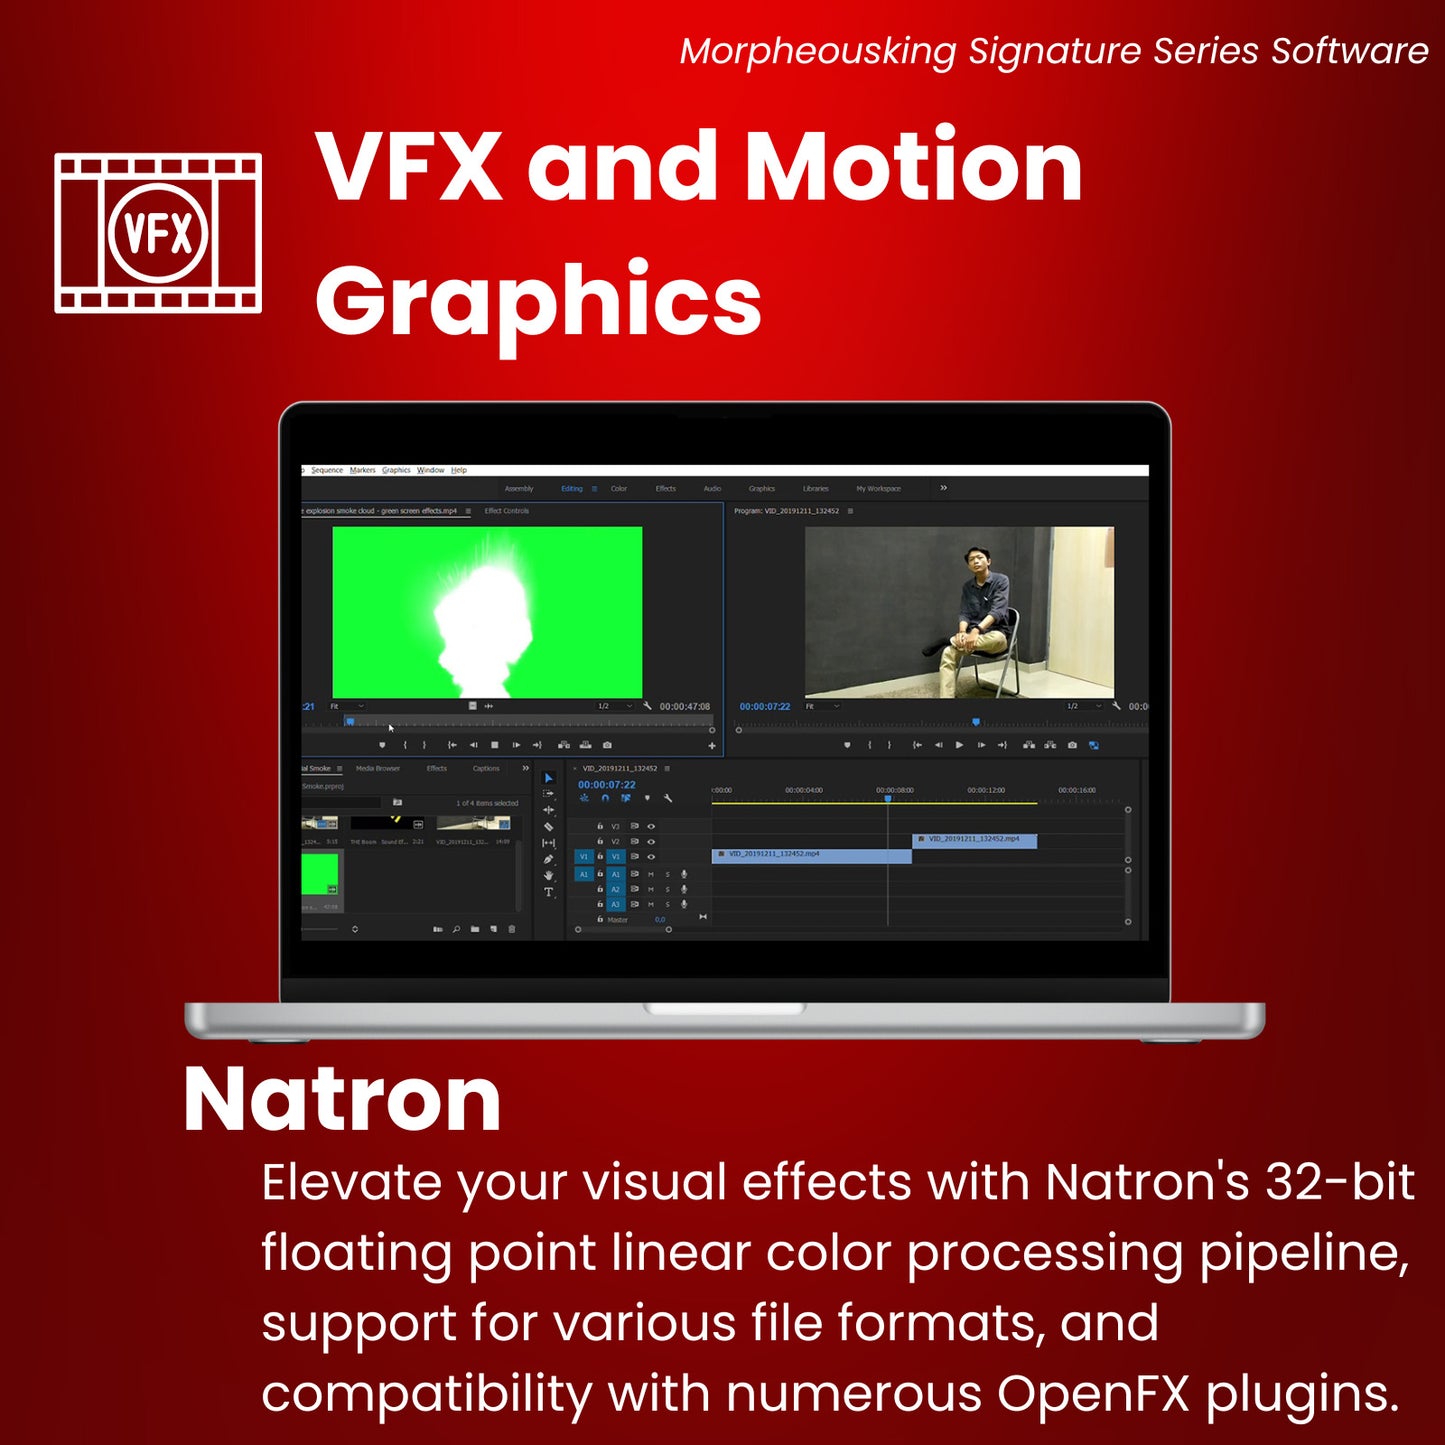 Full Online Video Creation Suite. Audio, Video, After Effects, Photo Editing DVD (Windows & Mac)